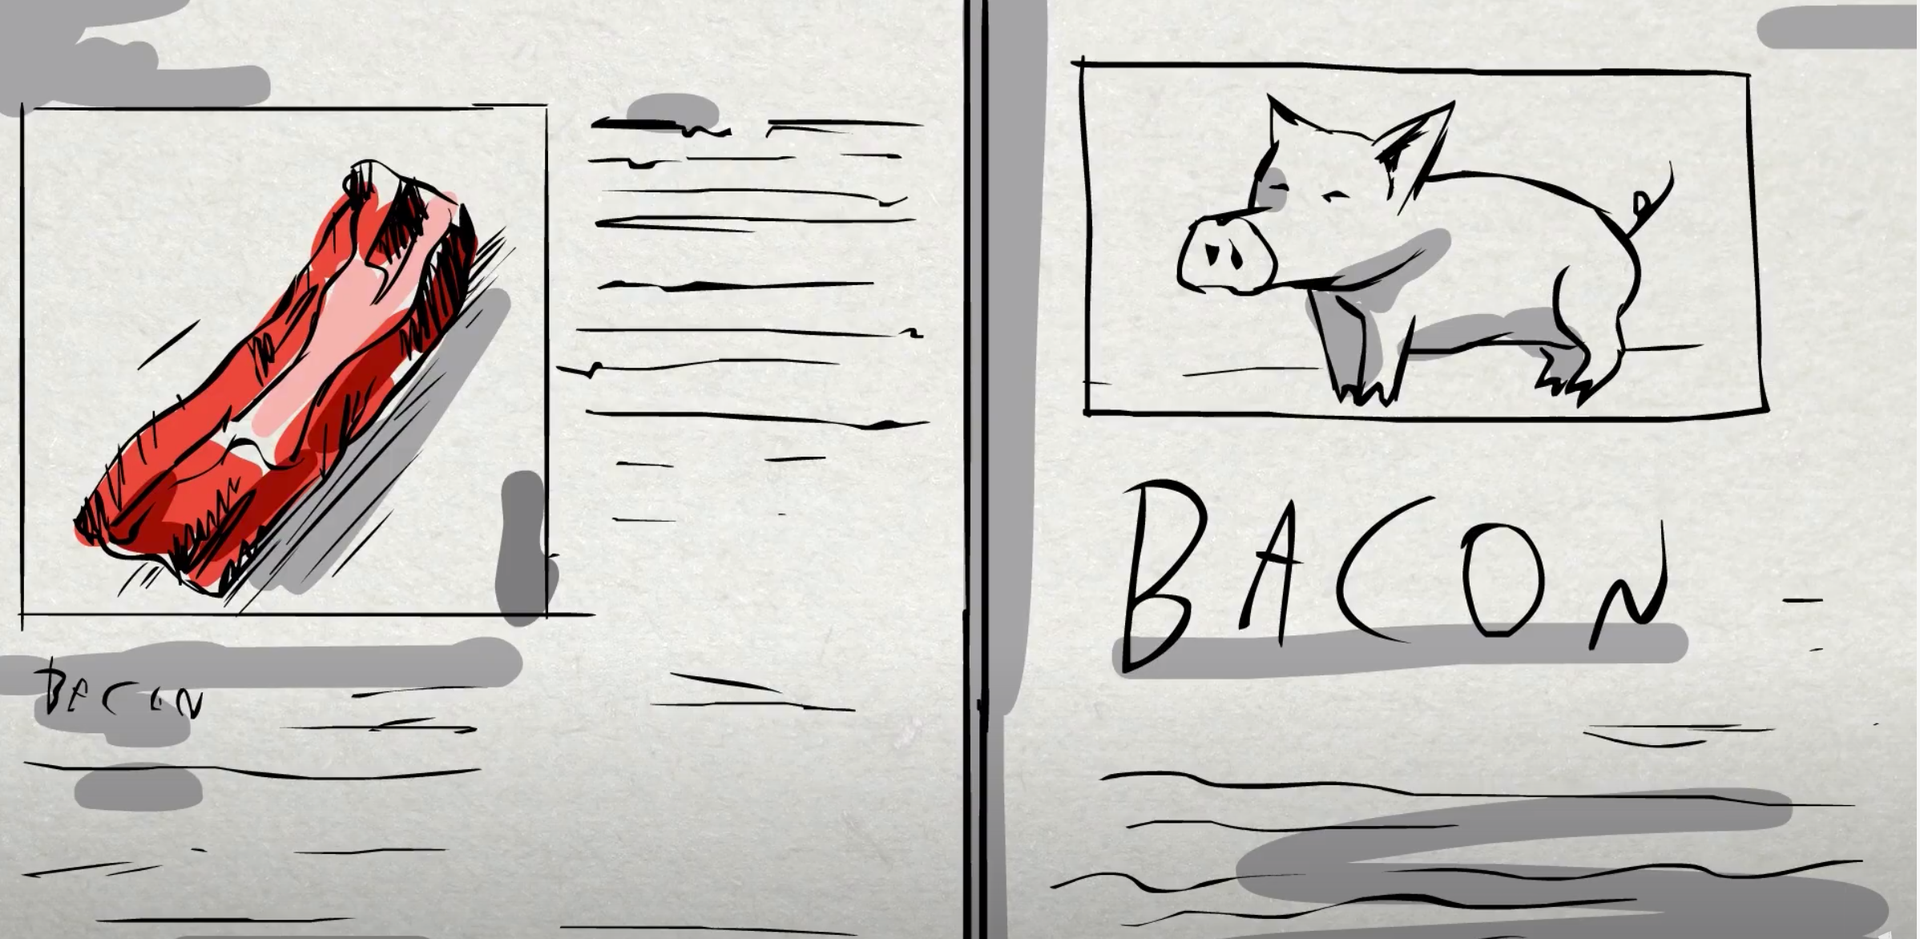 The History of Bacon